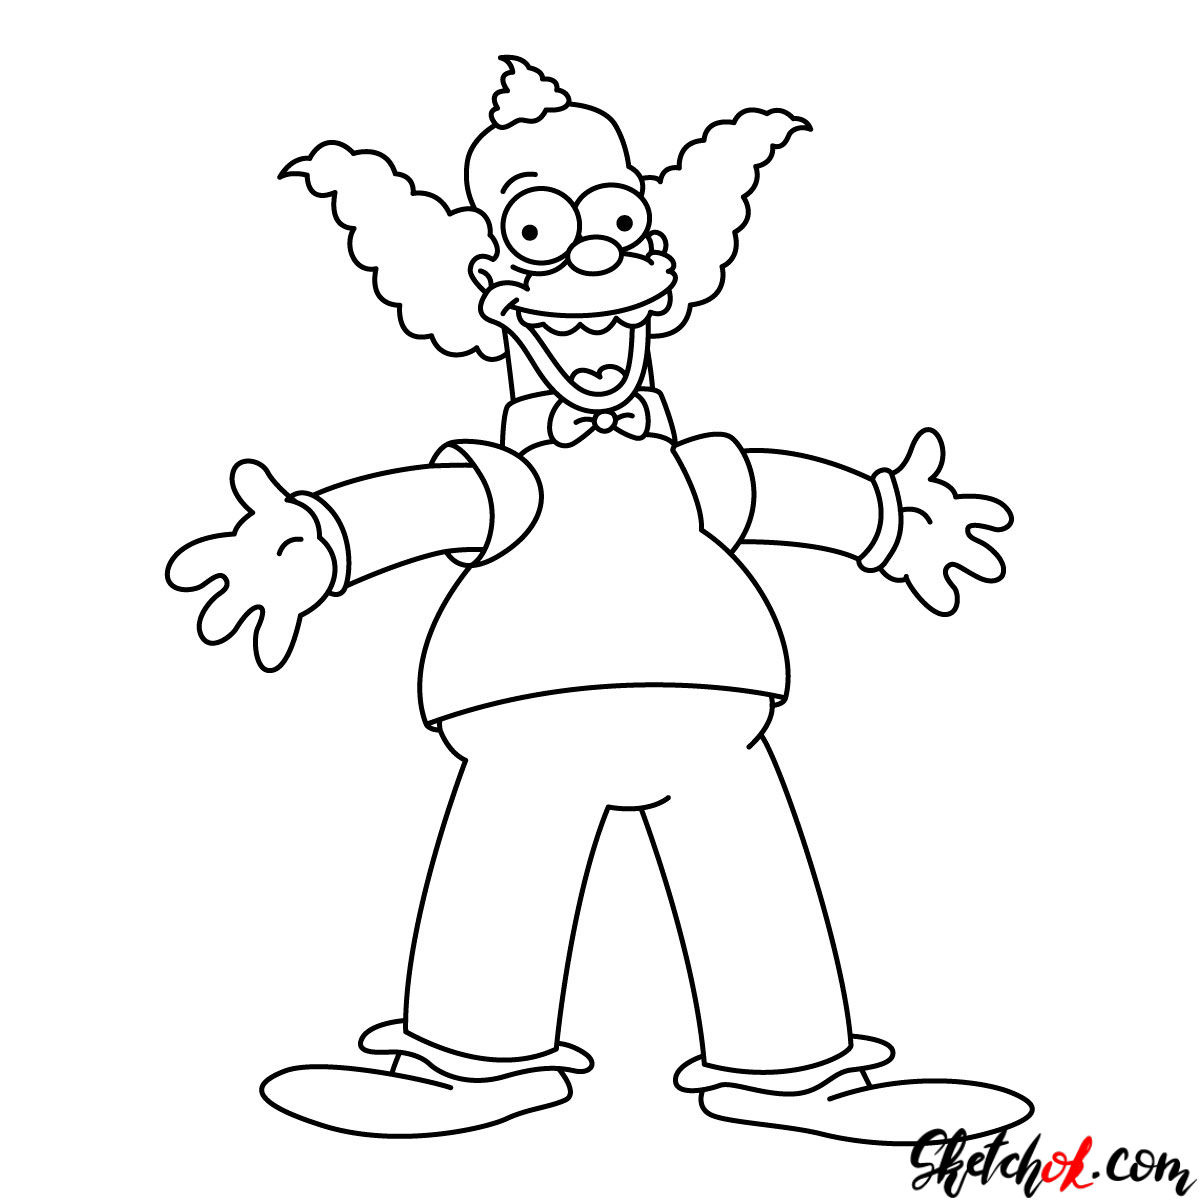 How to draw Krusty the Clown - step 12